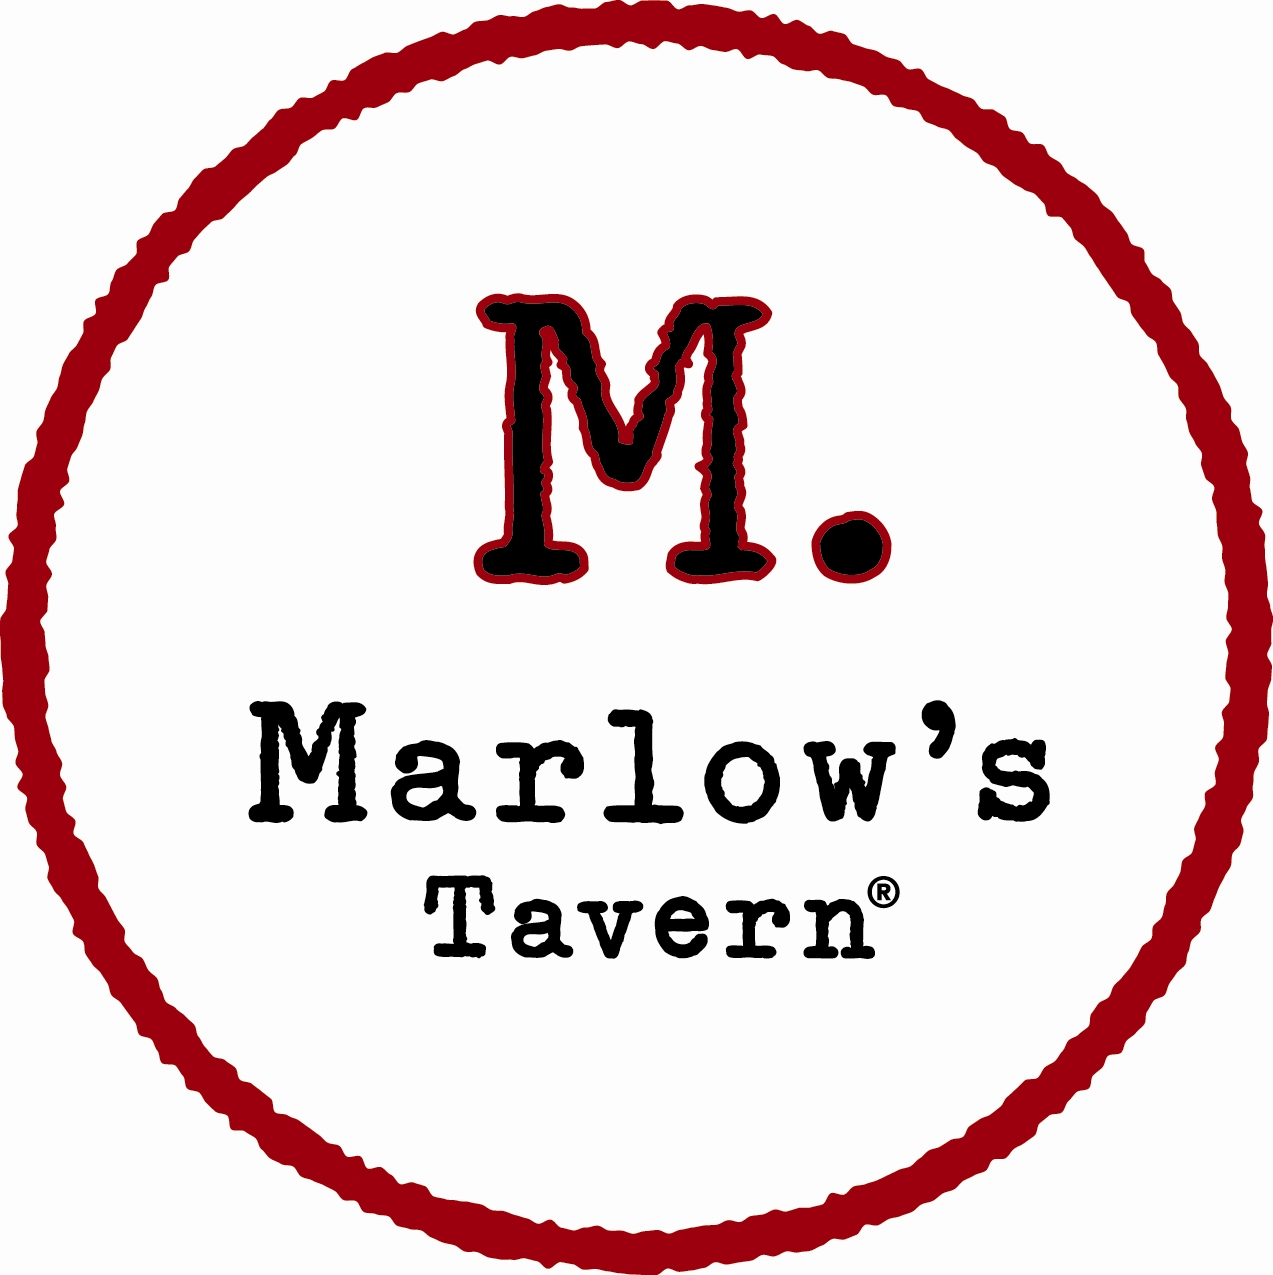 Marlow’s Tavern: Interview with Executive Chef John C. Metz